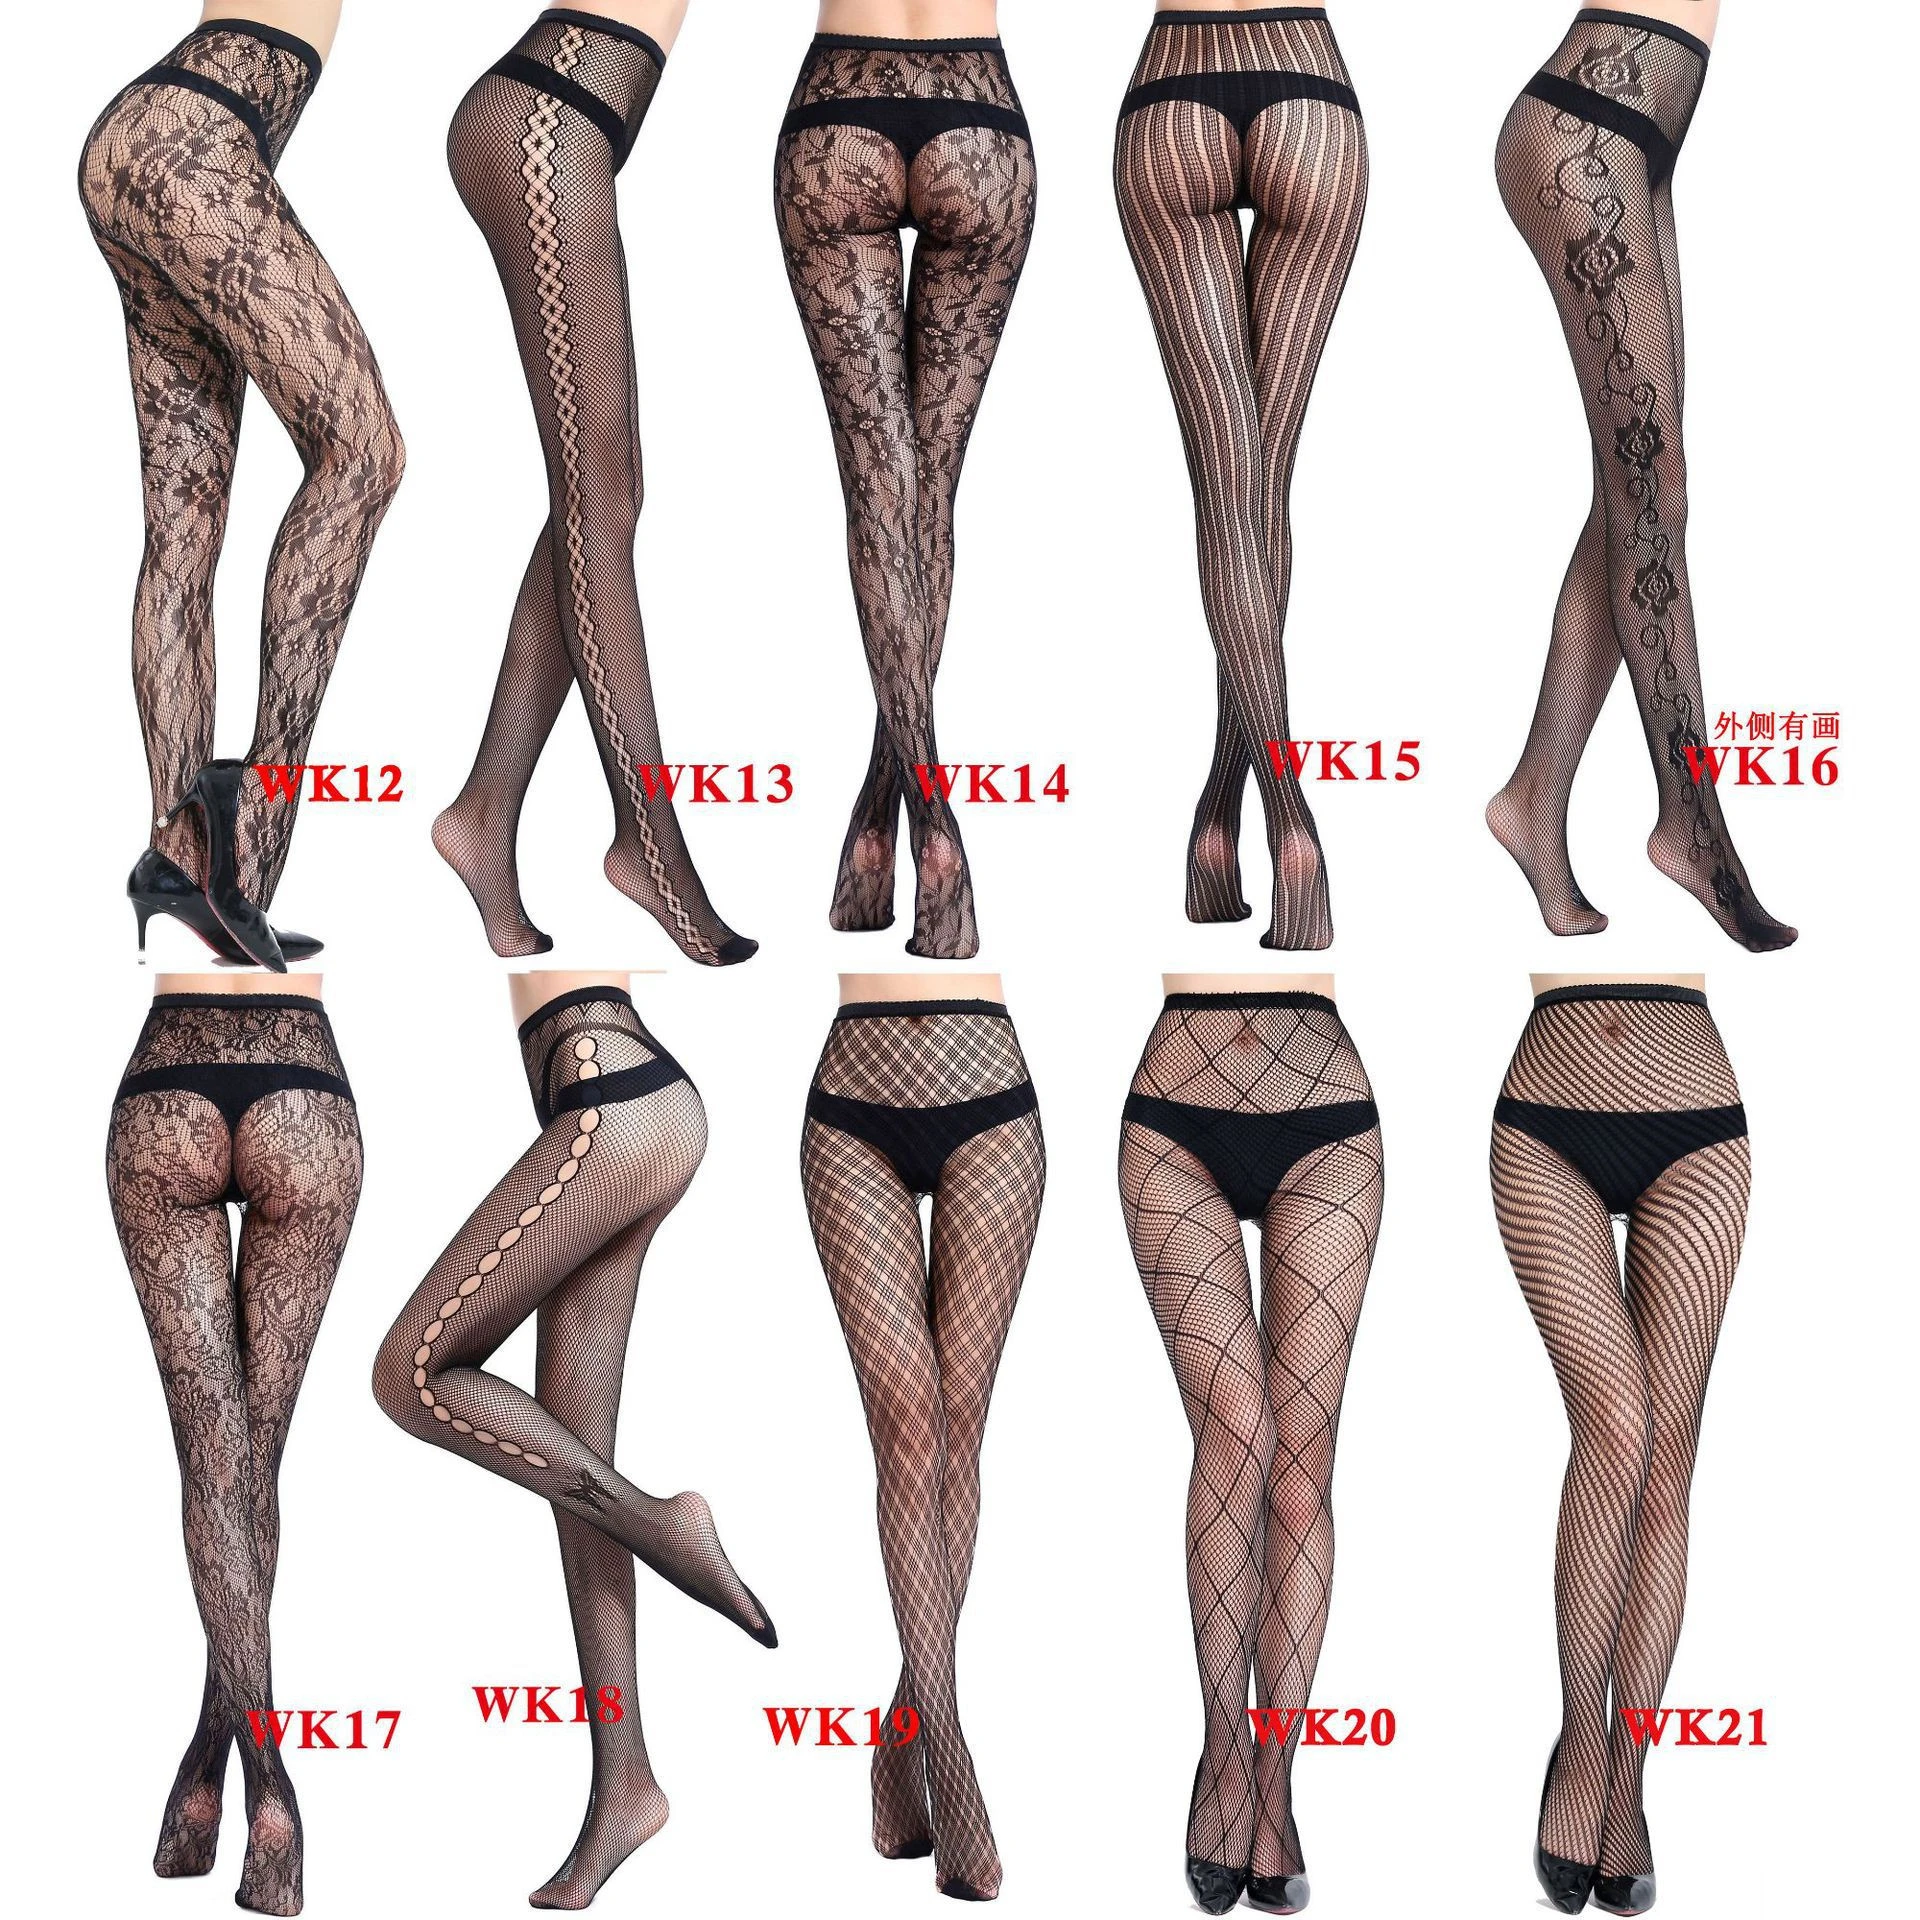 Womens Sexy Fishnet Black Tights Jacquard Weave Pantyhose Yarns Garter Grid Fish Net Stockings Hose Sexy Panty Collant Lingerie